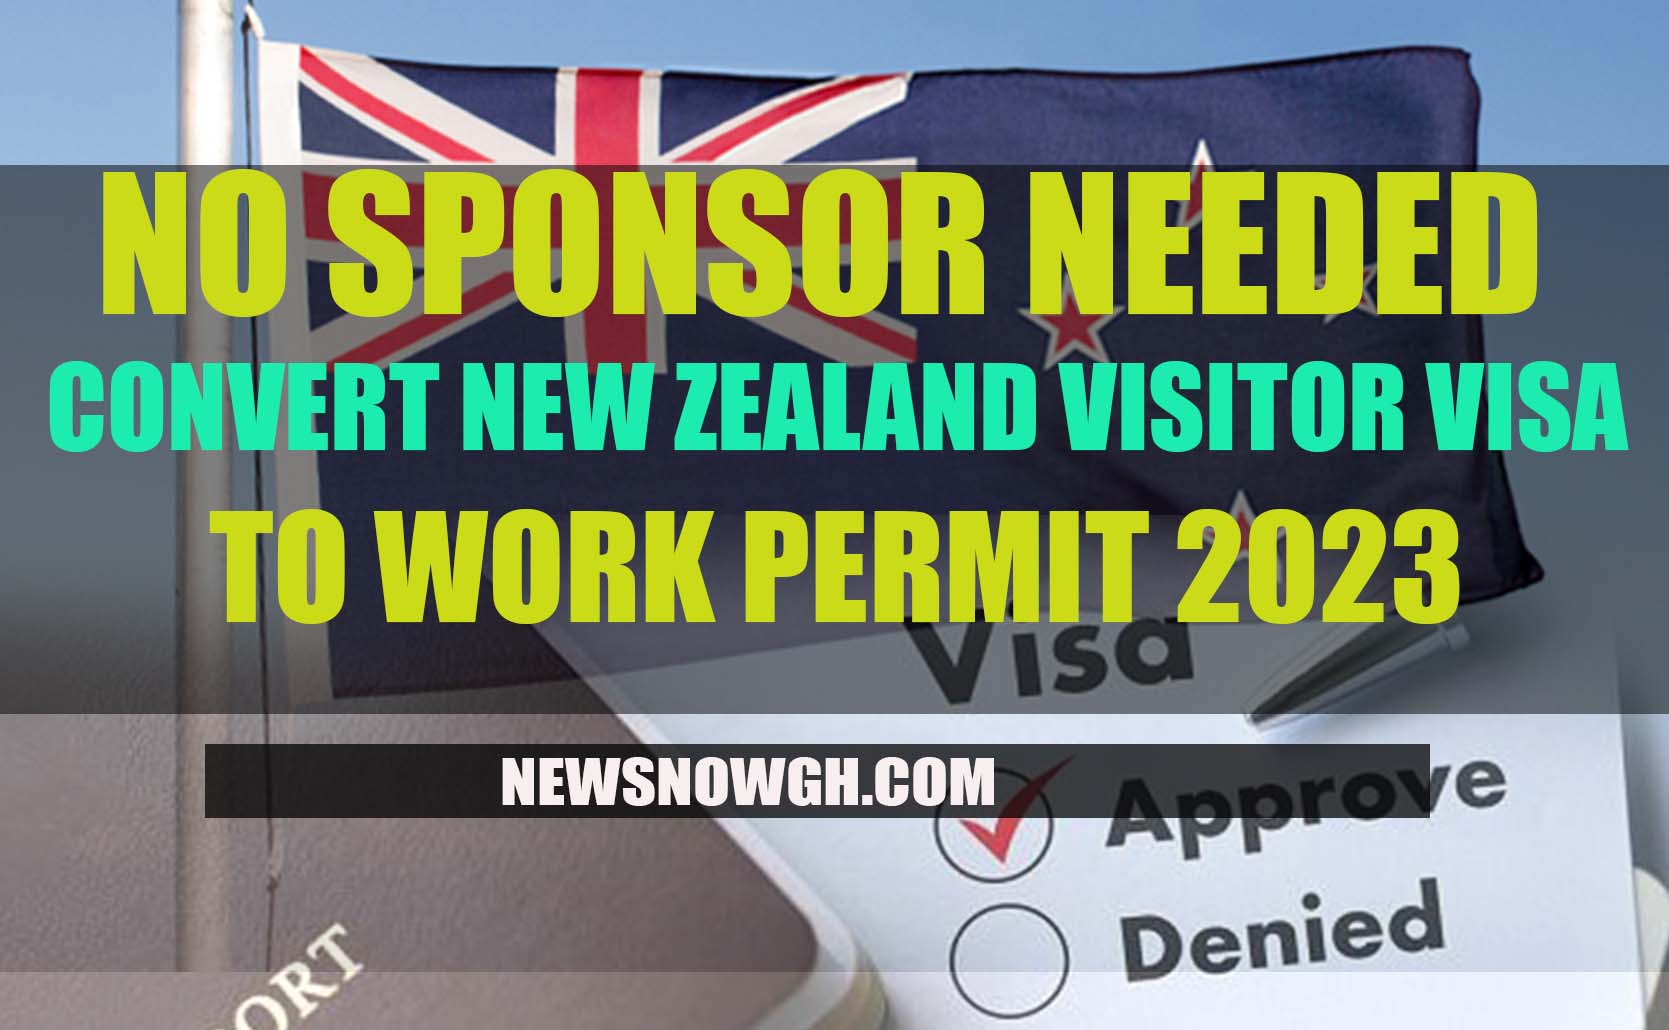 Steps To Convert New Zealand Visitor Visa To Work Permit 2023 0152